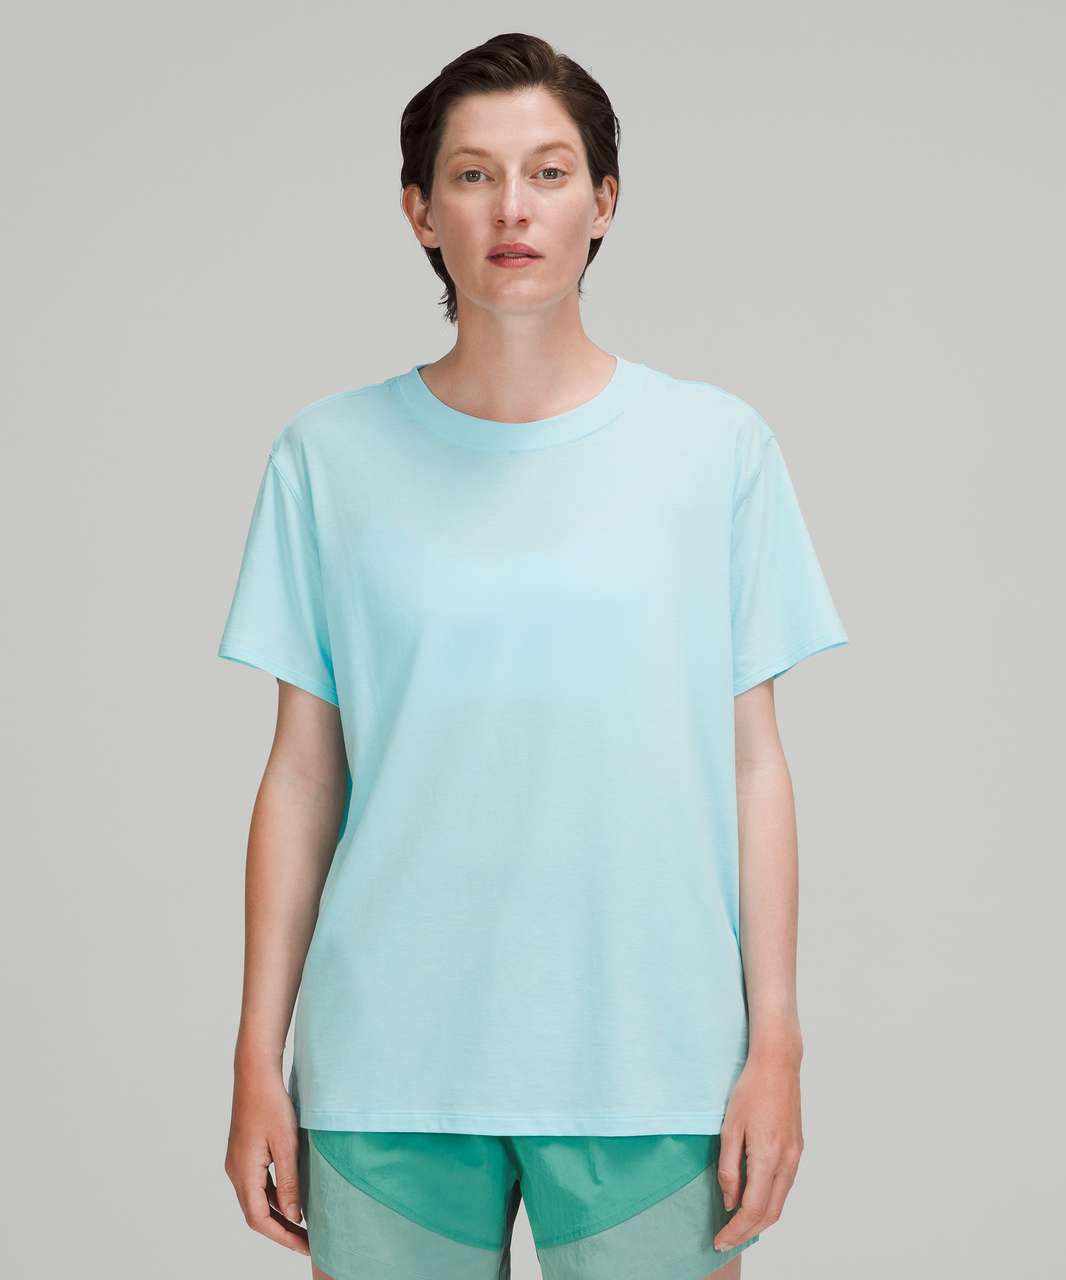 Lululemon All Yours Tee - Icing Blue